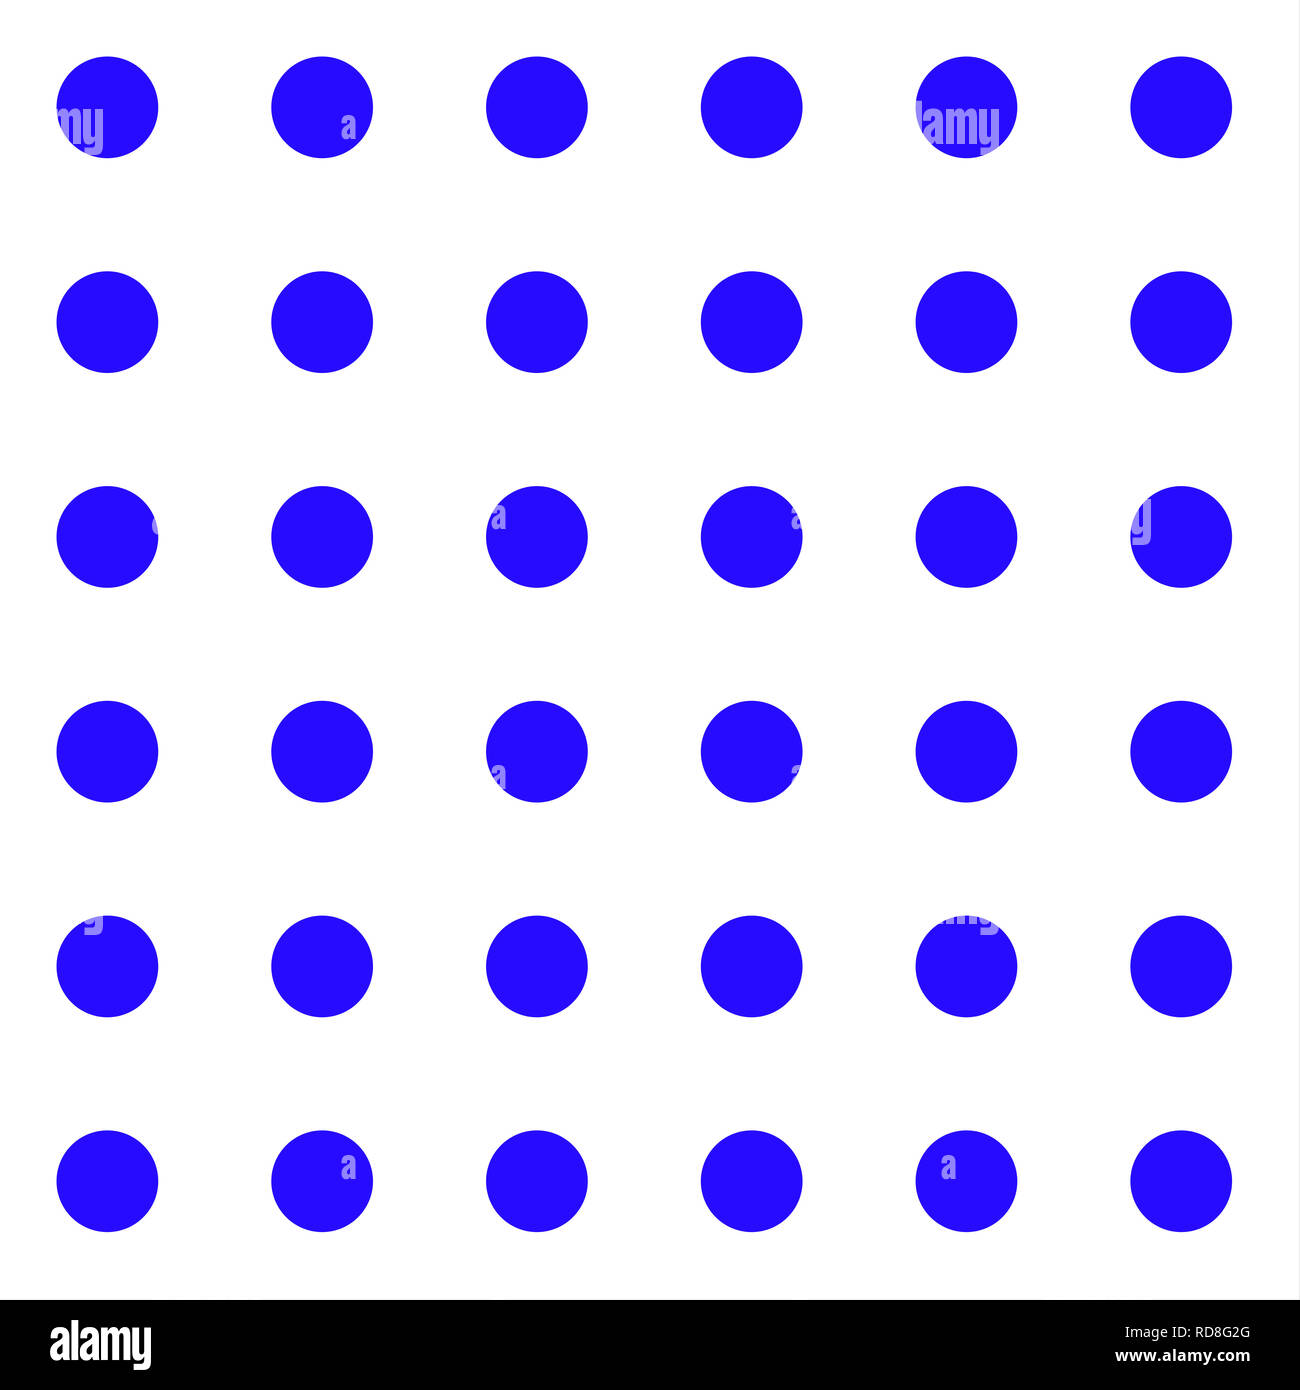 Seamless repeating pattern of big blue dots on a white background Stock Photo